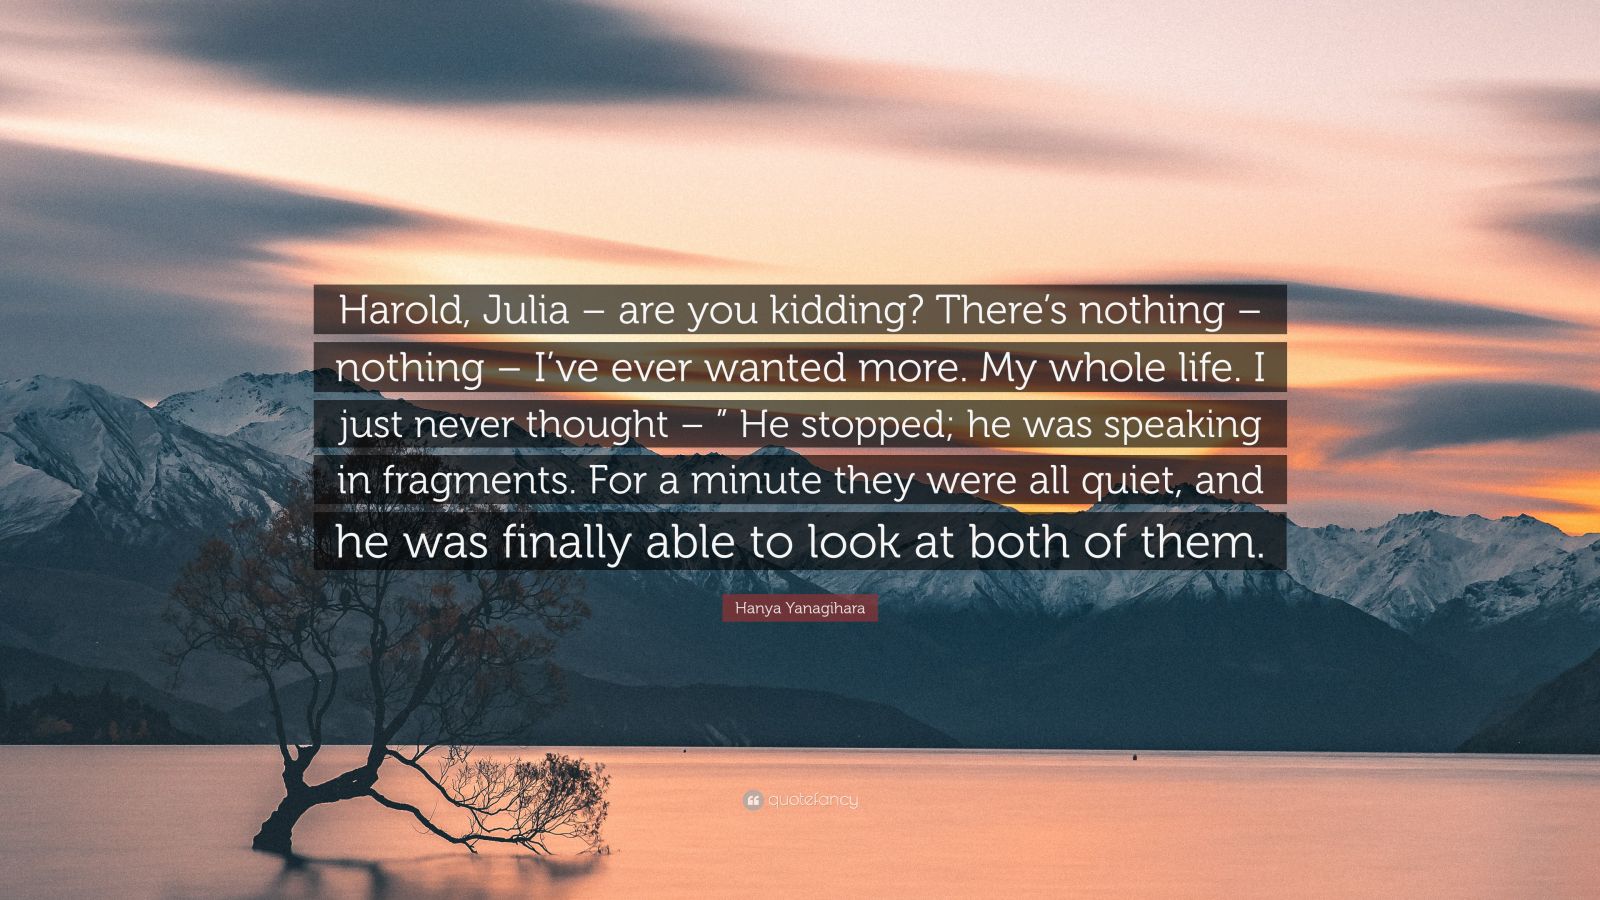 Hanya Yanagihara Quote: “Harold, Julia – are you kidding? There's nothing –  nothing – I've ever wanted more. My whole life. I just never thought ”